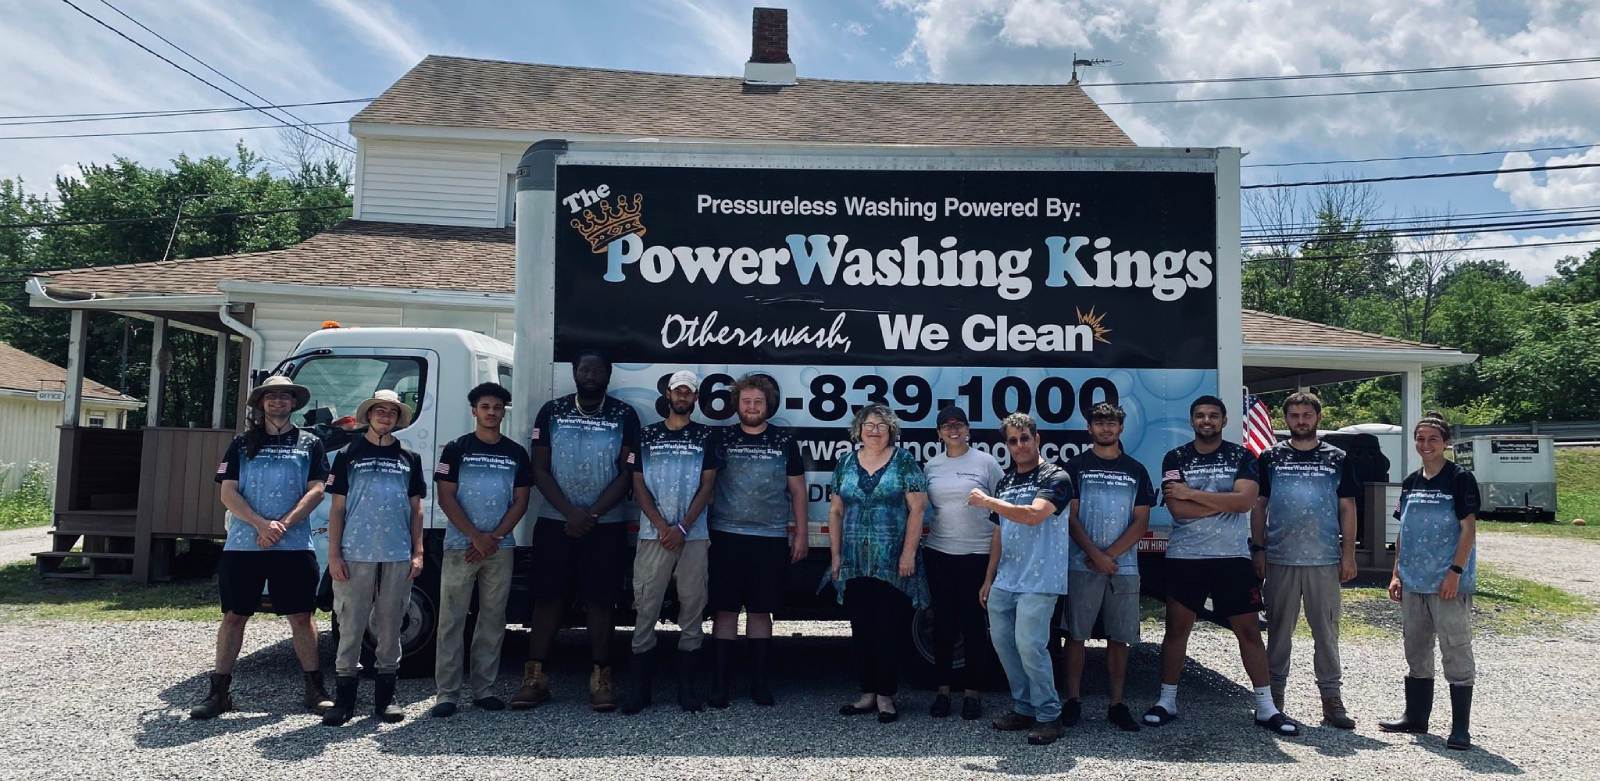 The Powerwashing Kings team standing in front of a pressure-washing truck